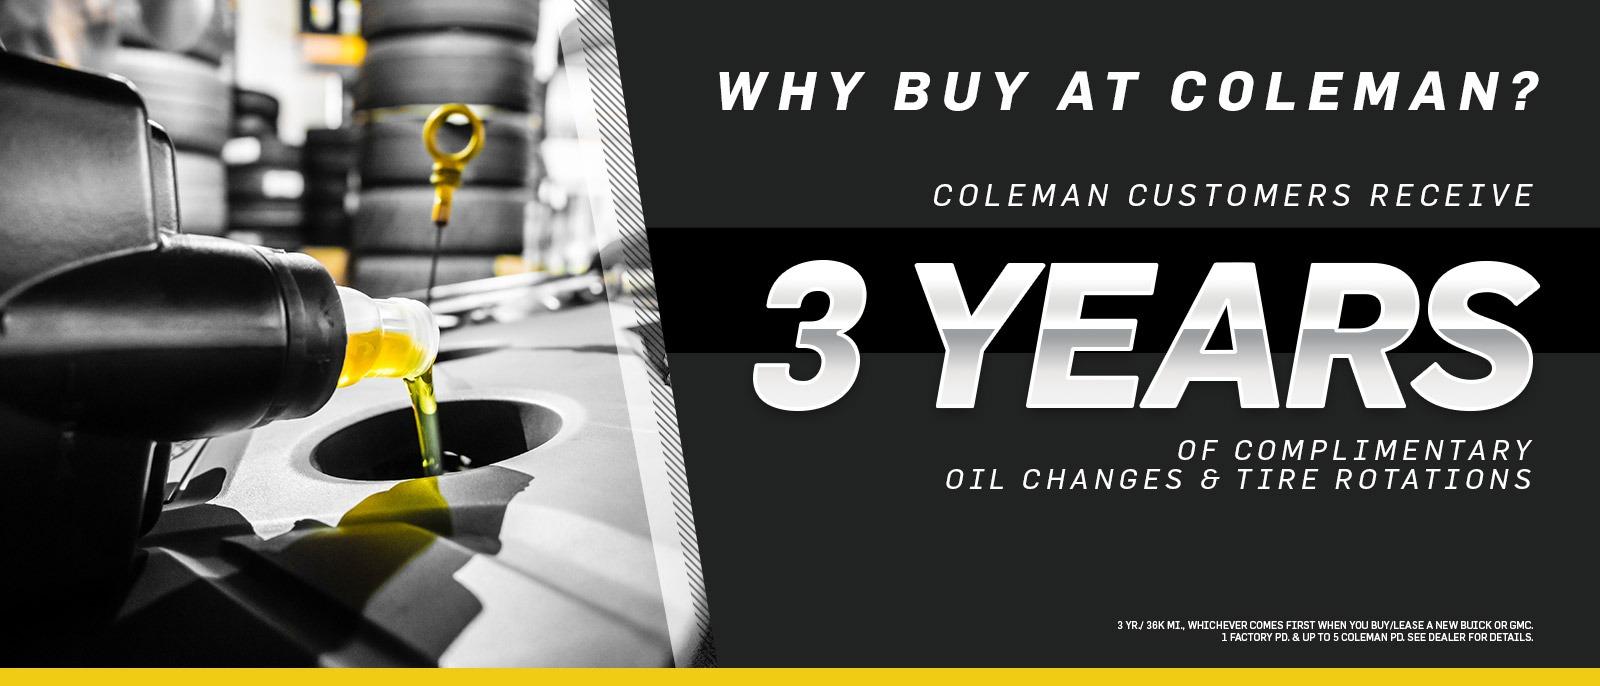 Why Buy At Coleman | Lawrenceville, NJ